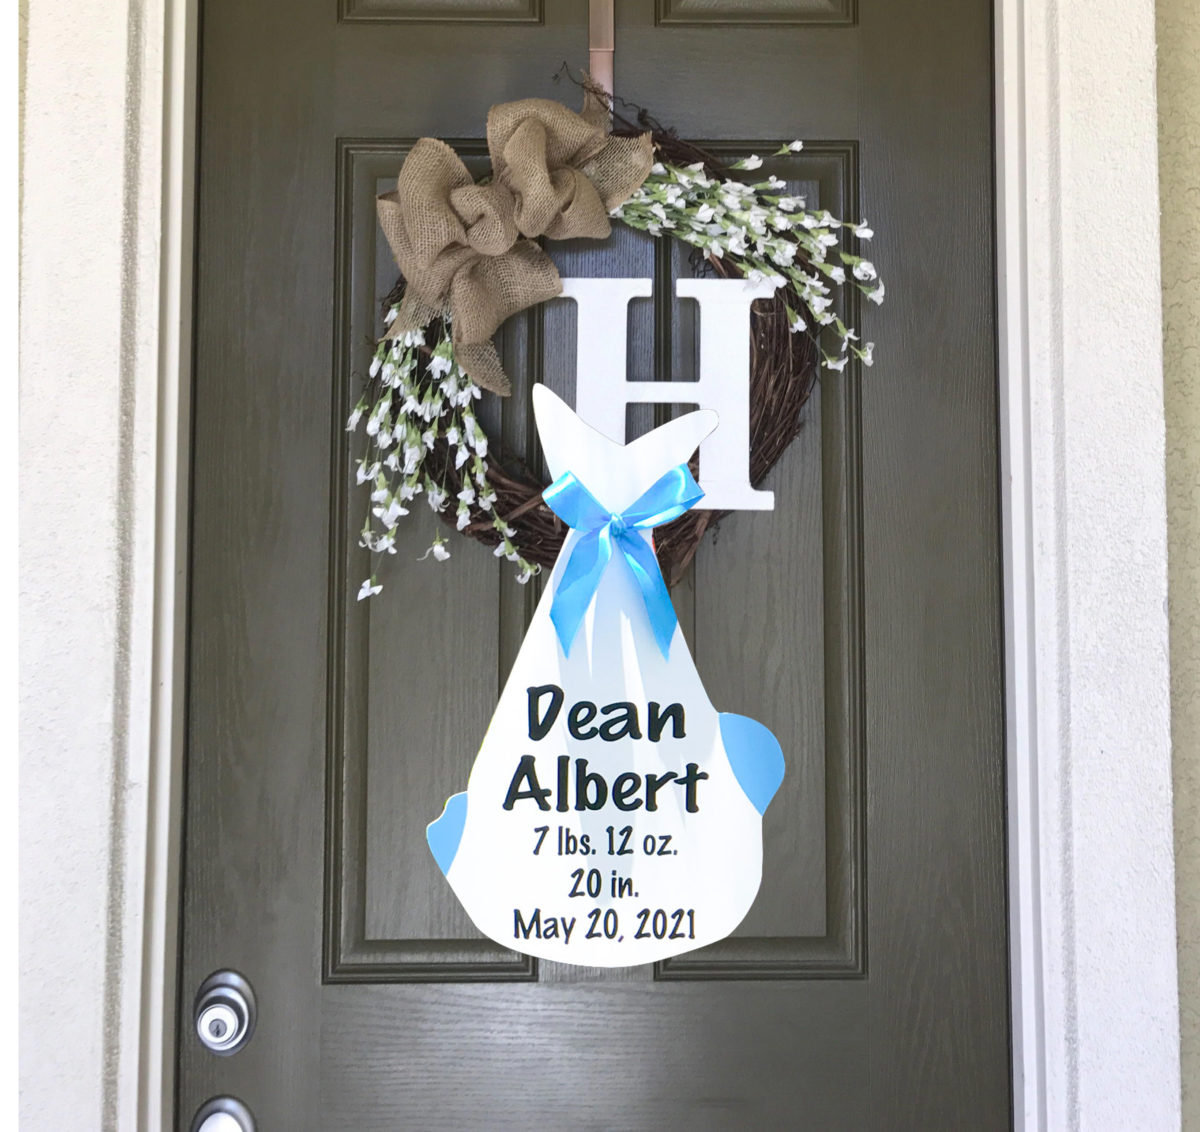 Birth Announcement Door Hanger: South Bay Storks - Stork Sign Rentals in Los Angeles County, CA